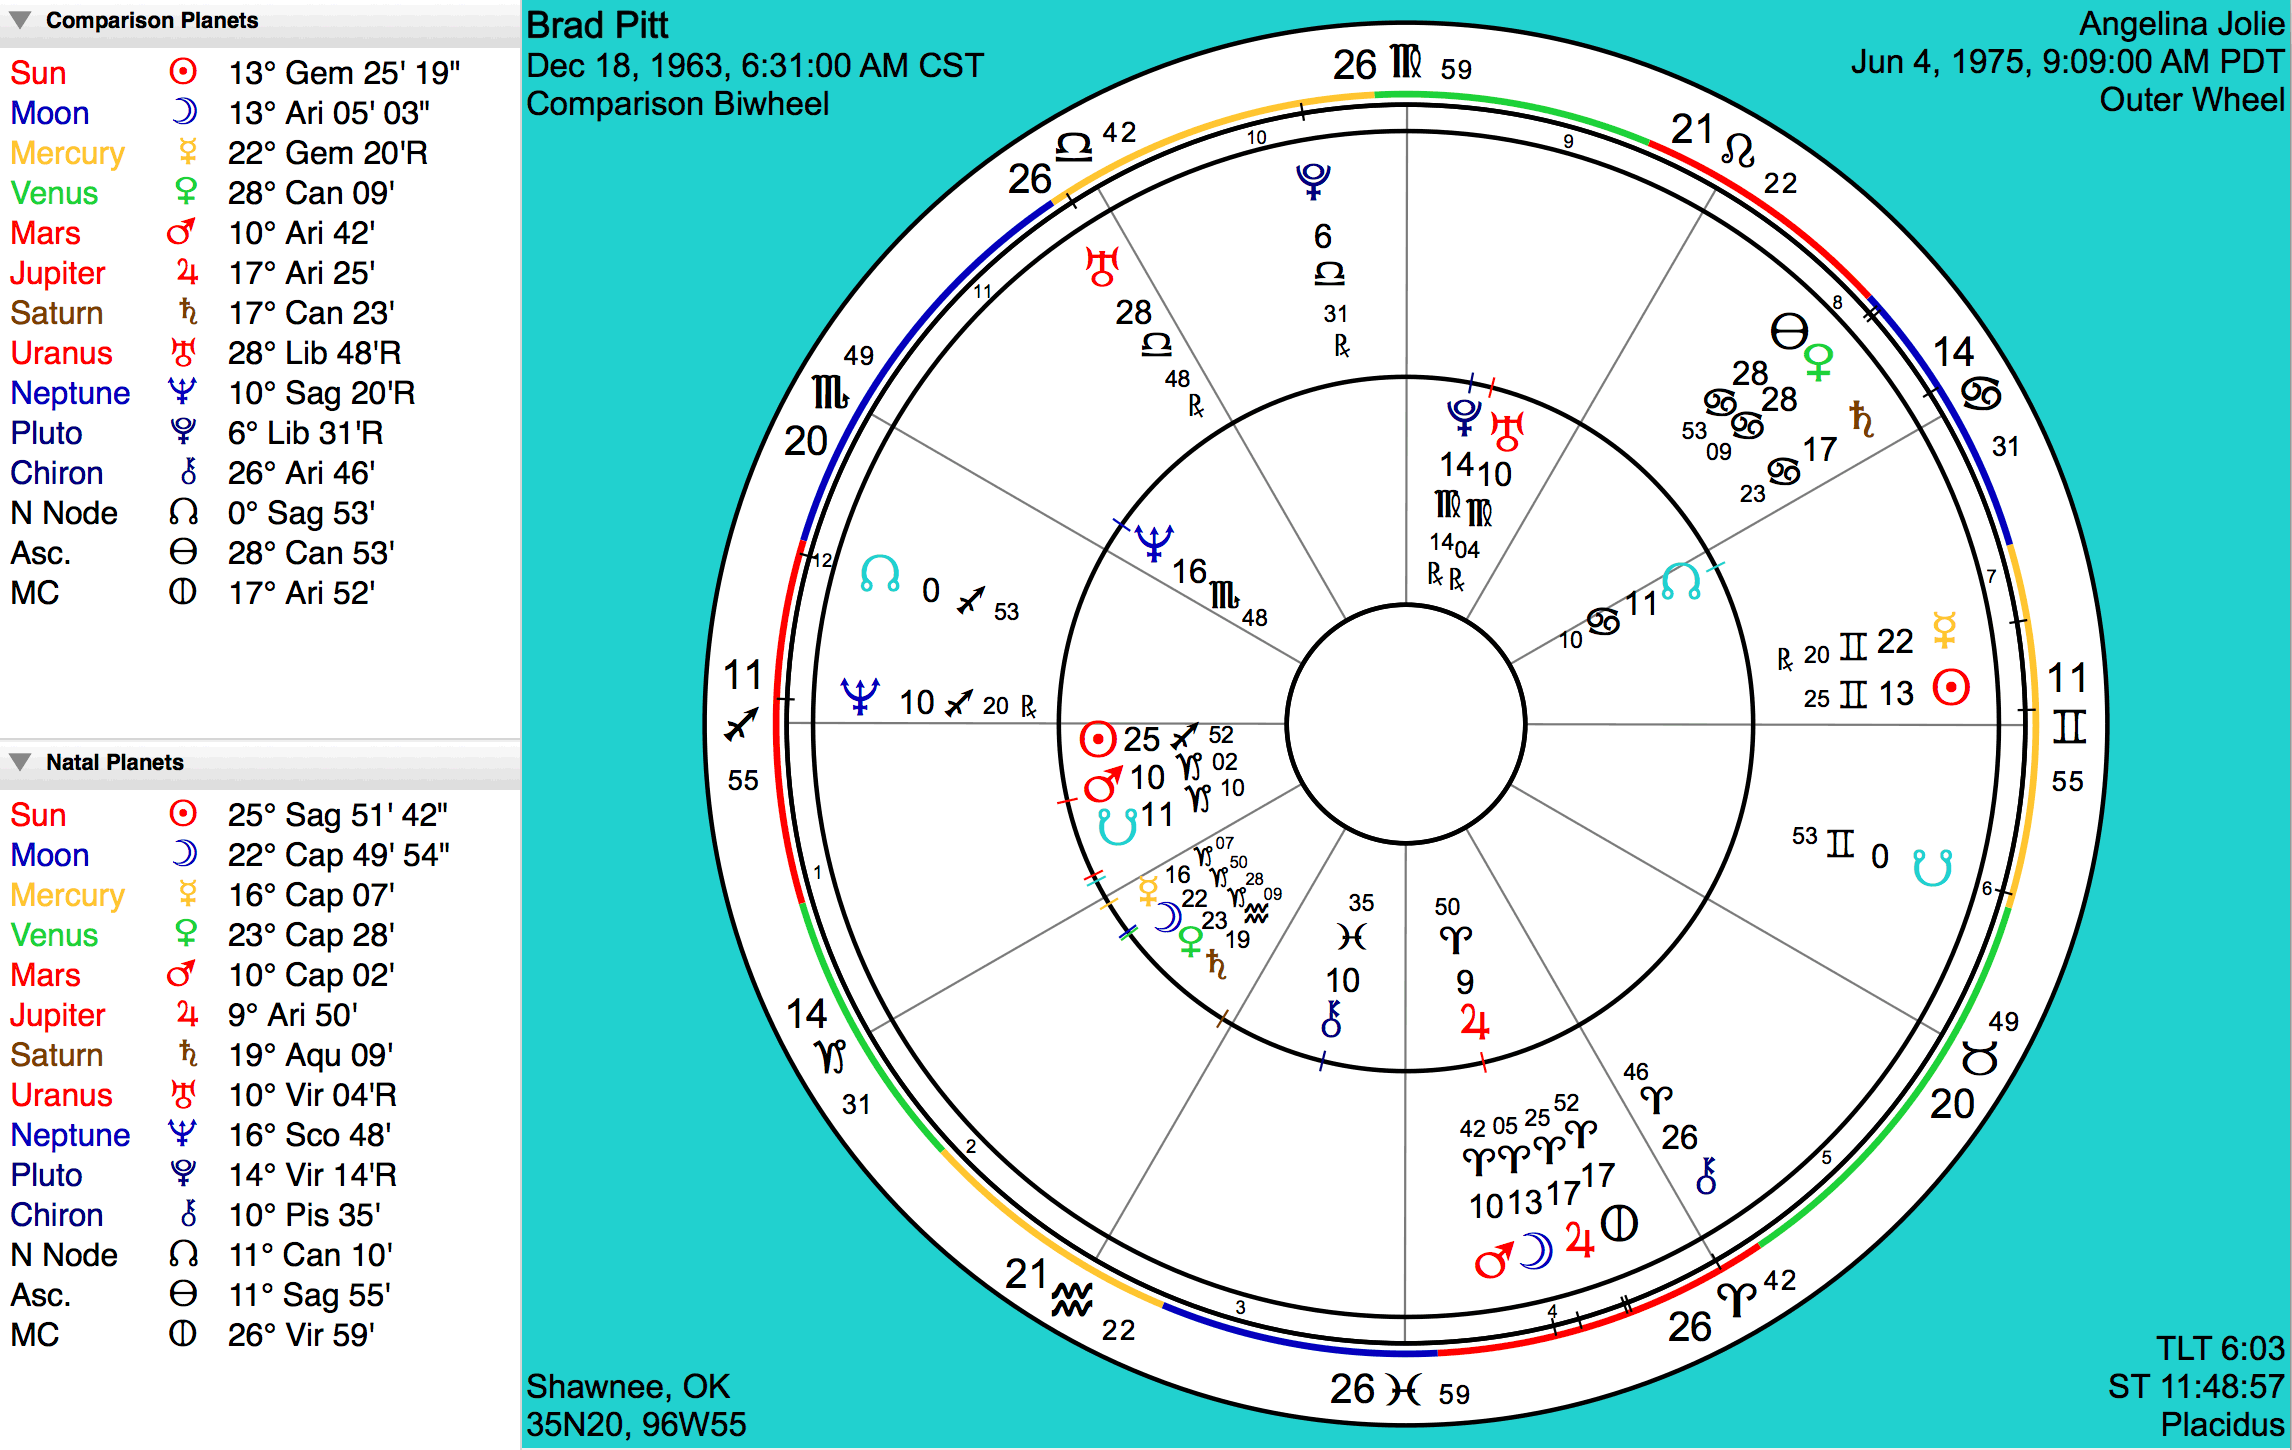 72 Exhaustive Astrology Compatibility Chart By Birthdate.